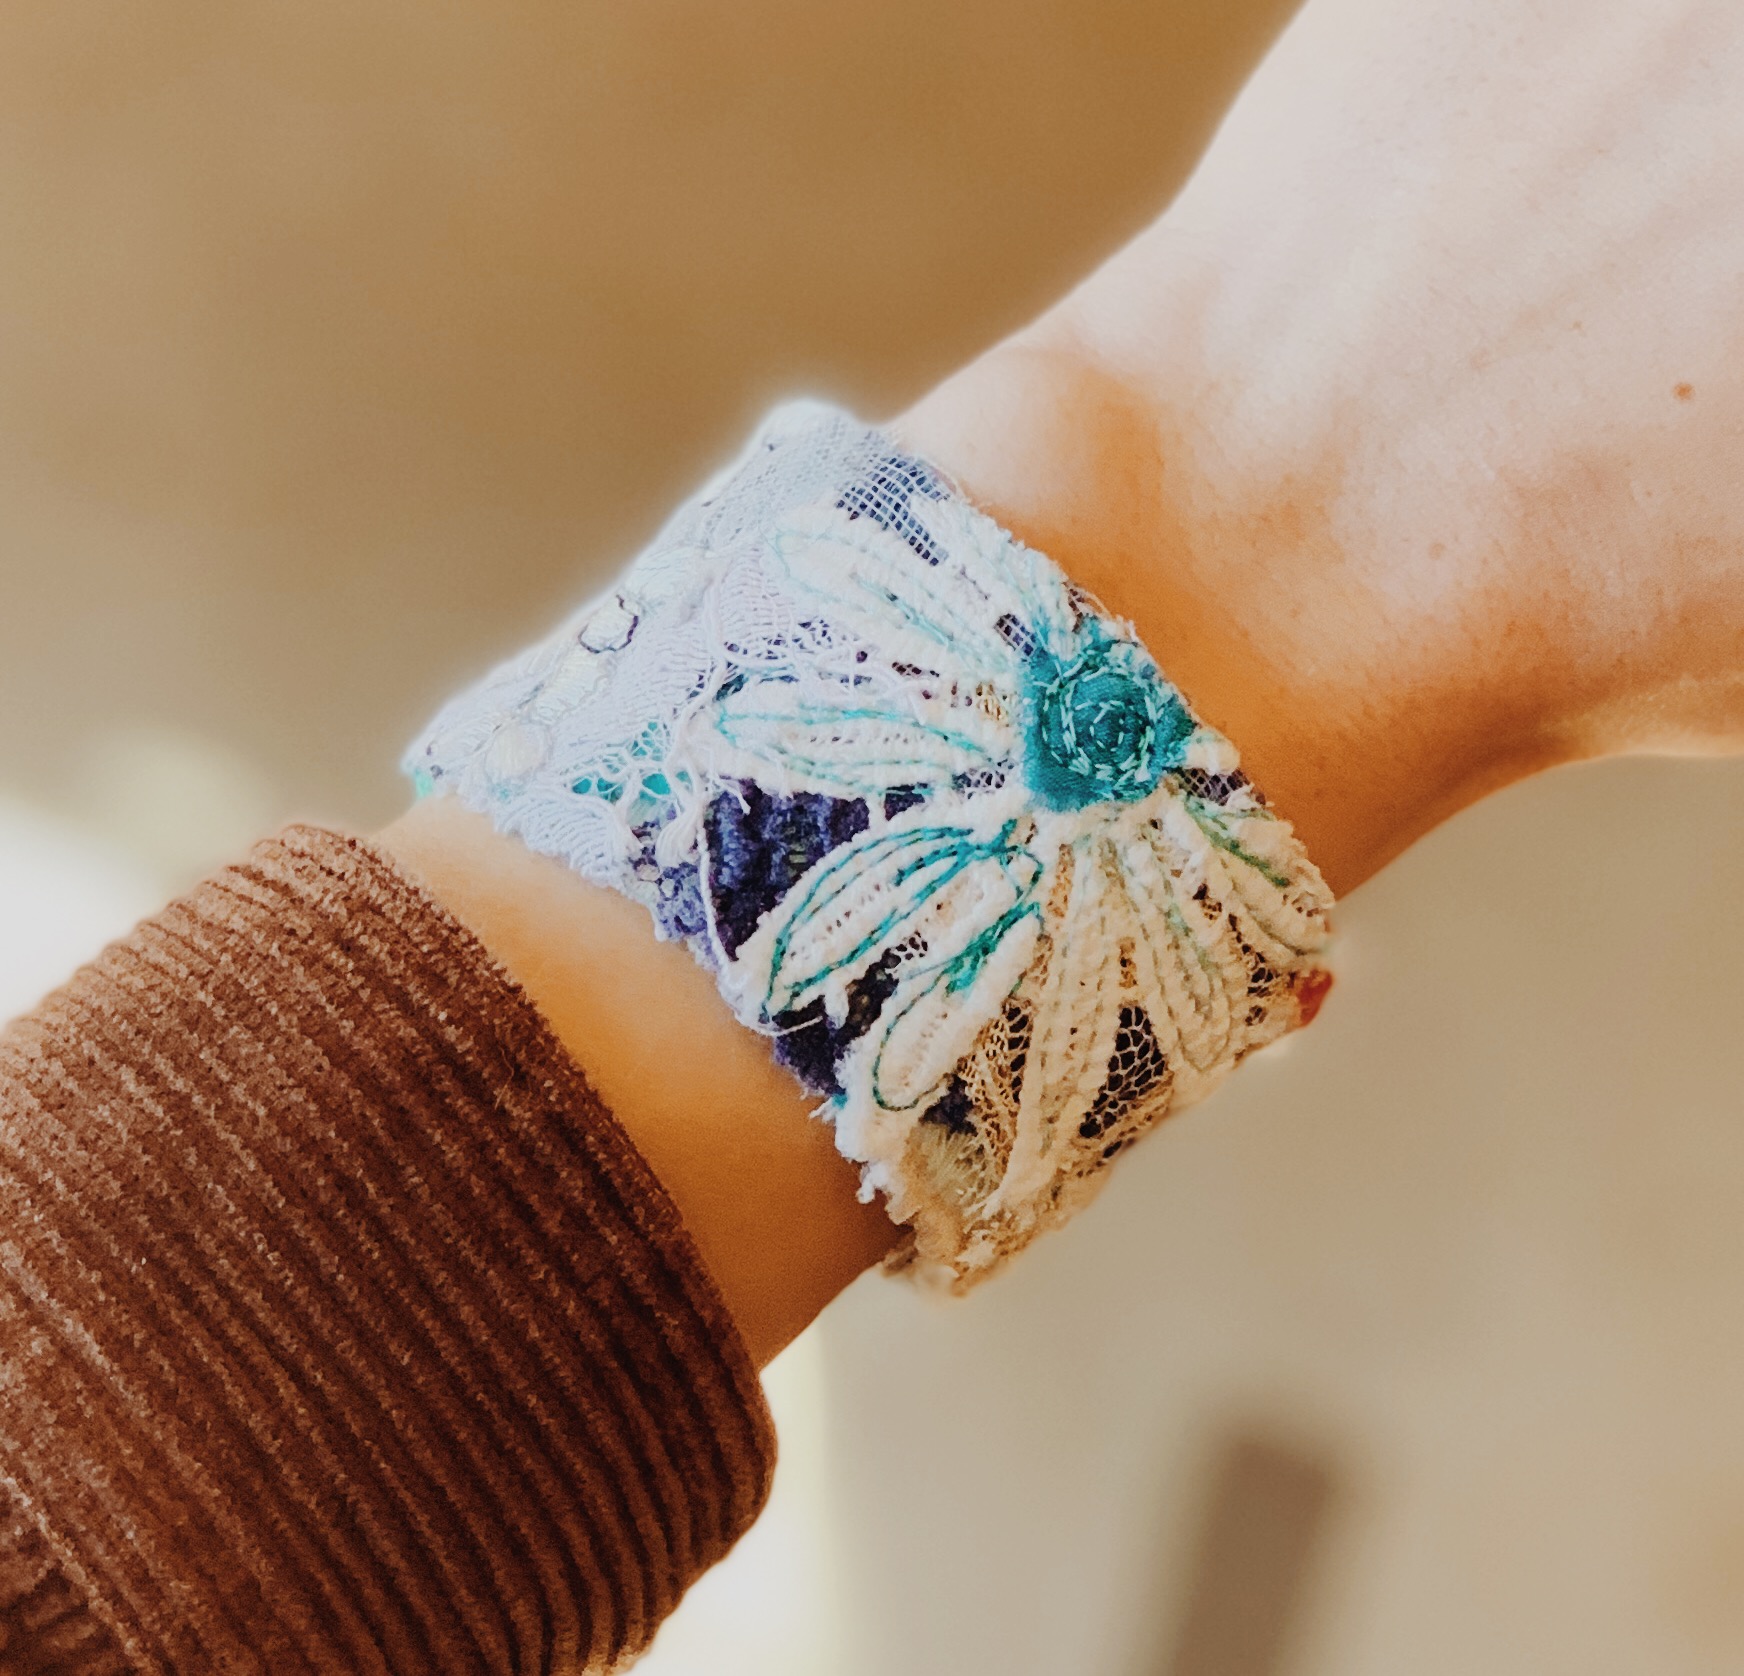 This gorgeous cuff by Kelli Hawk Designs is covered in hand done fabric layering! It measures 2.5 inches in diameter and about 1.5 inches tall.